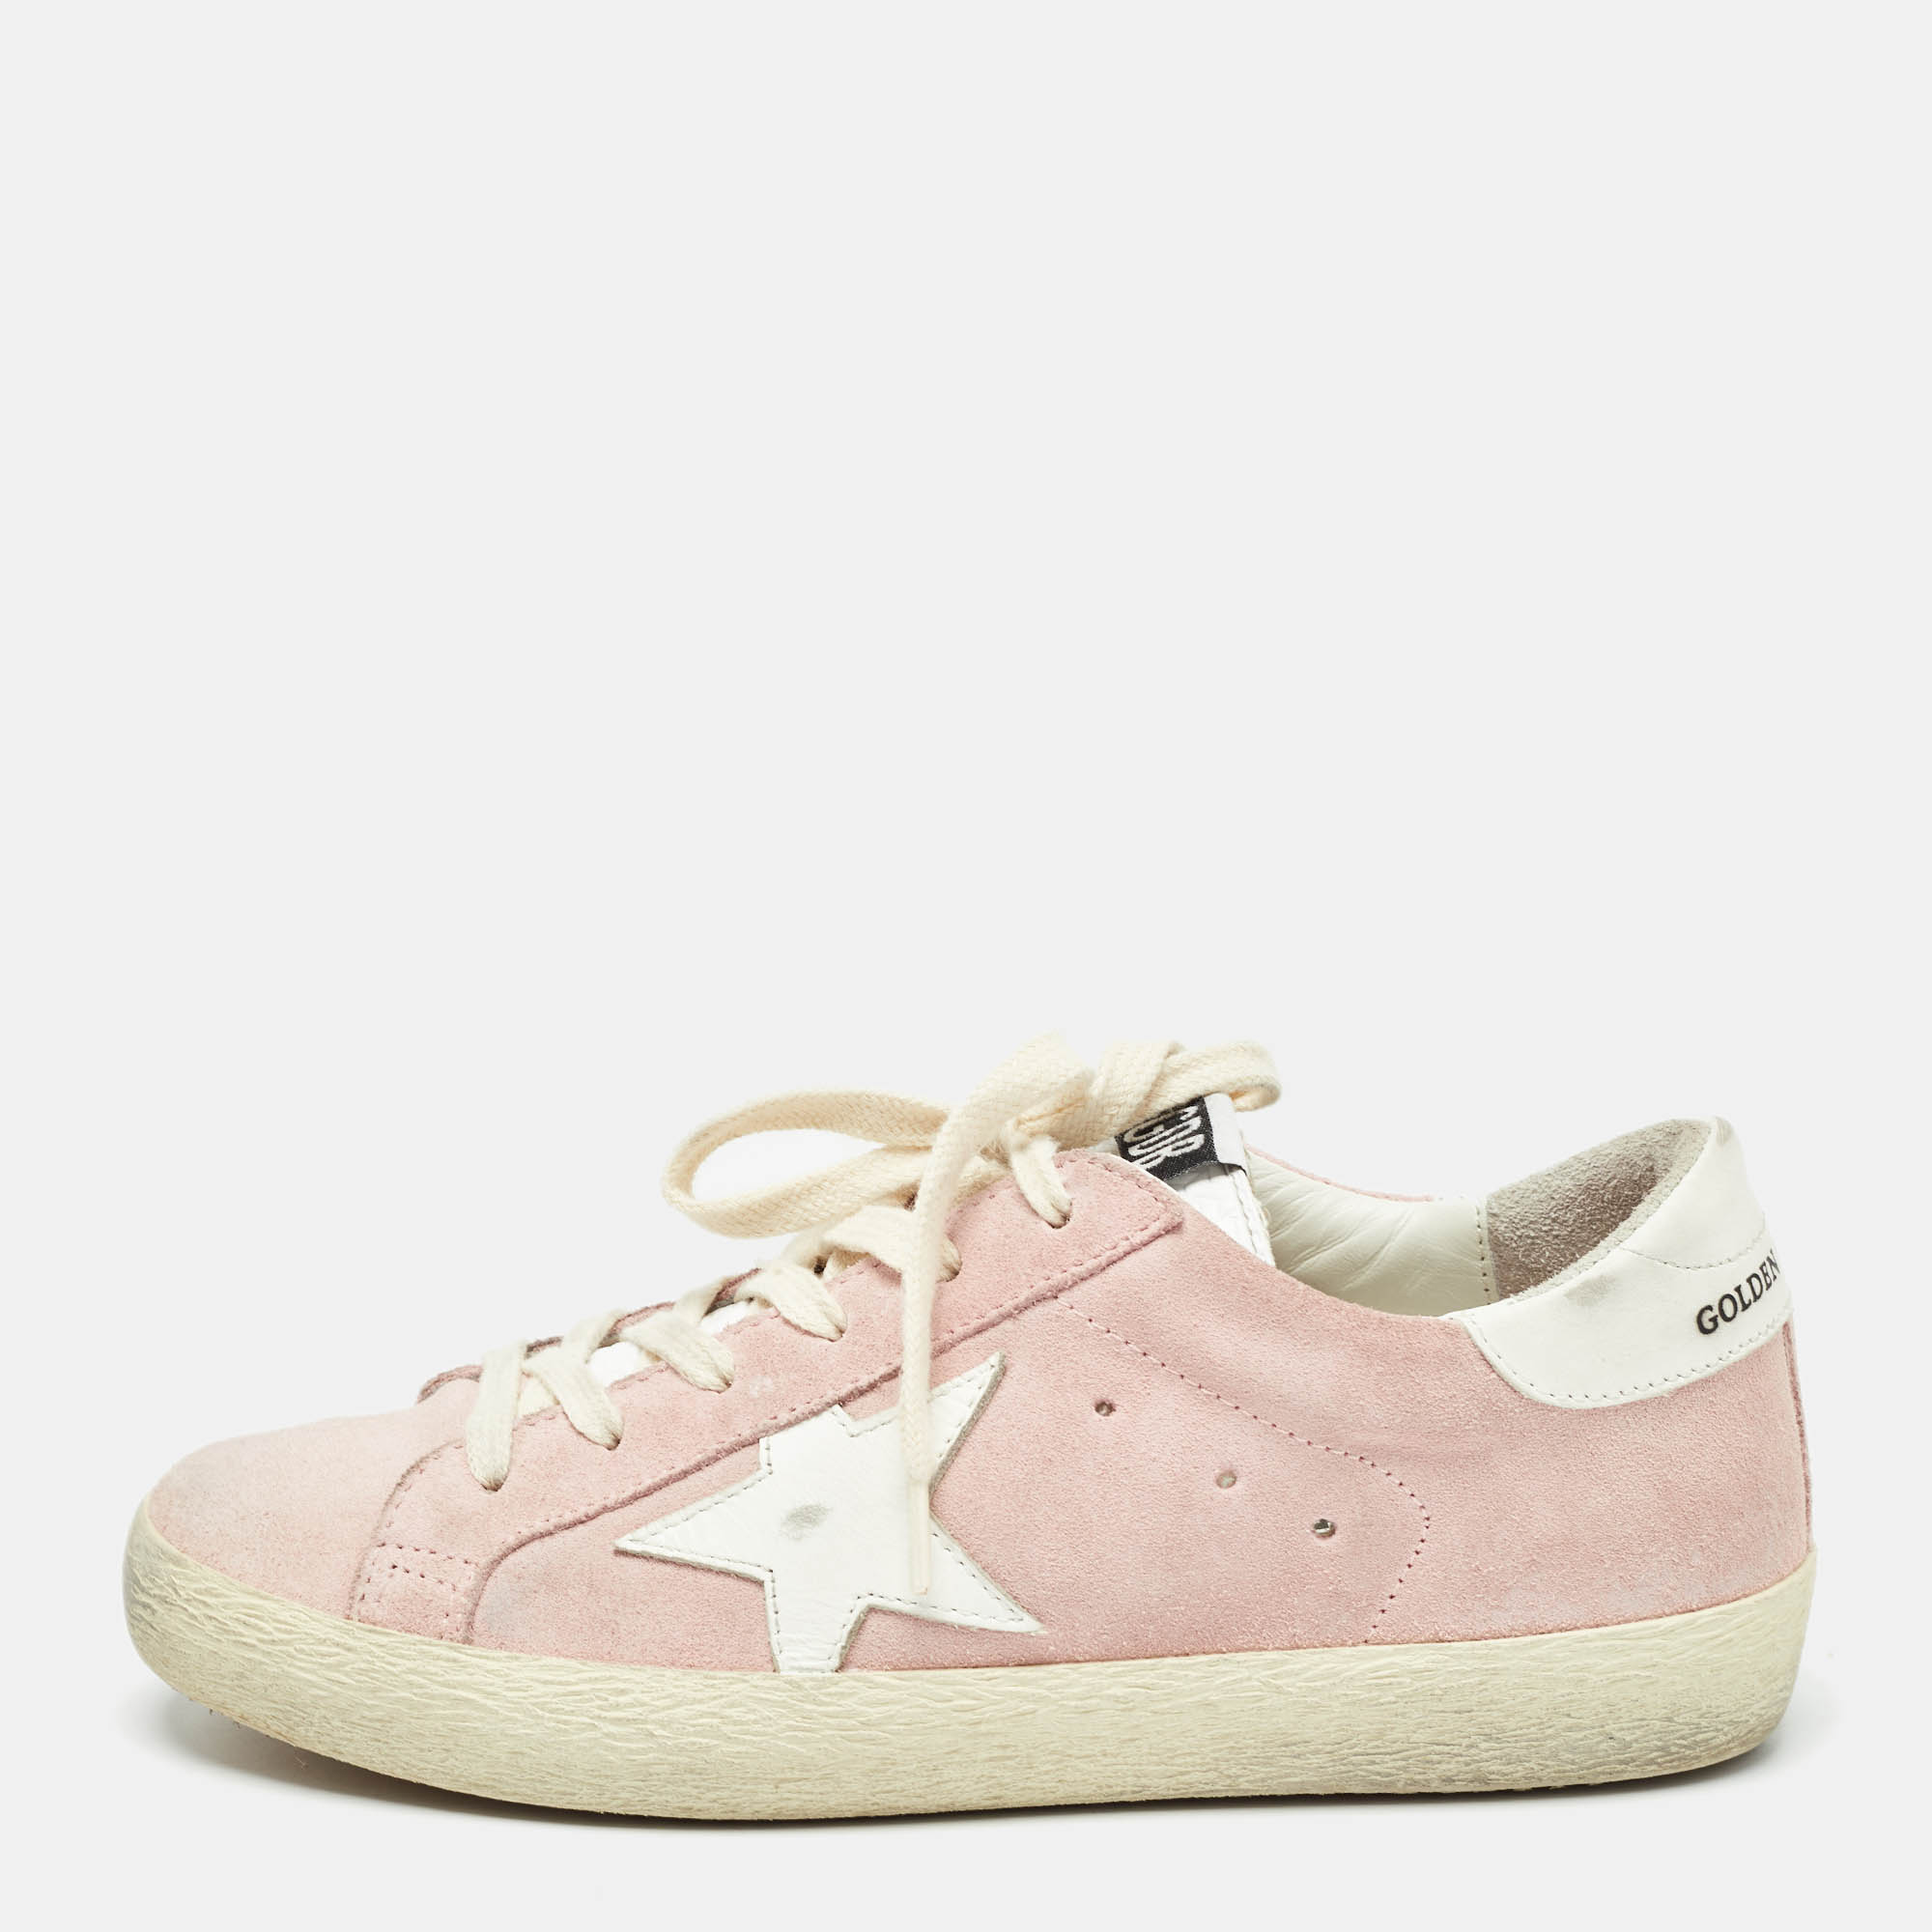 

Golden Goose Pink/White Suede and Leather Superstar Sneakers Size